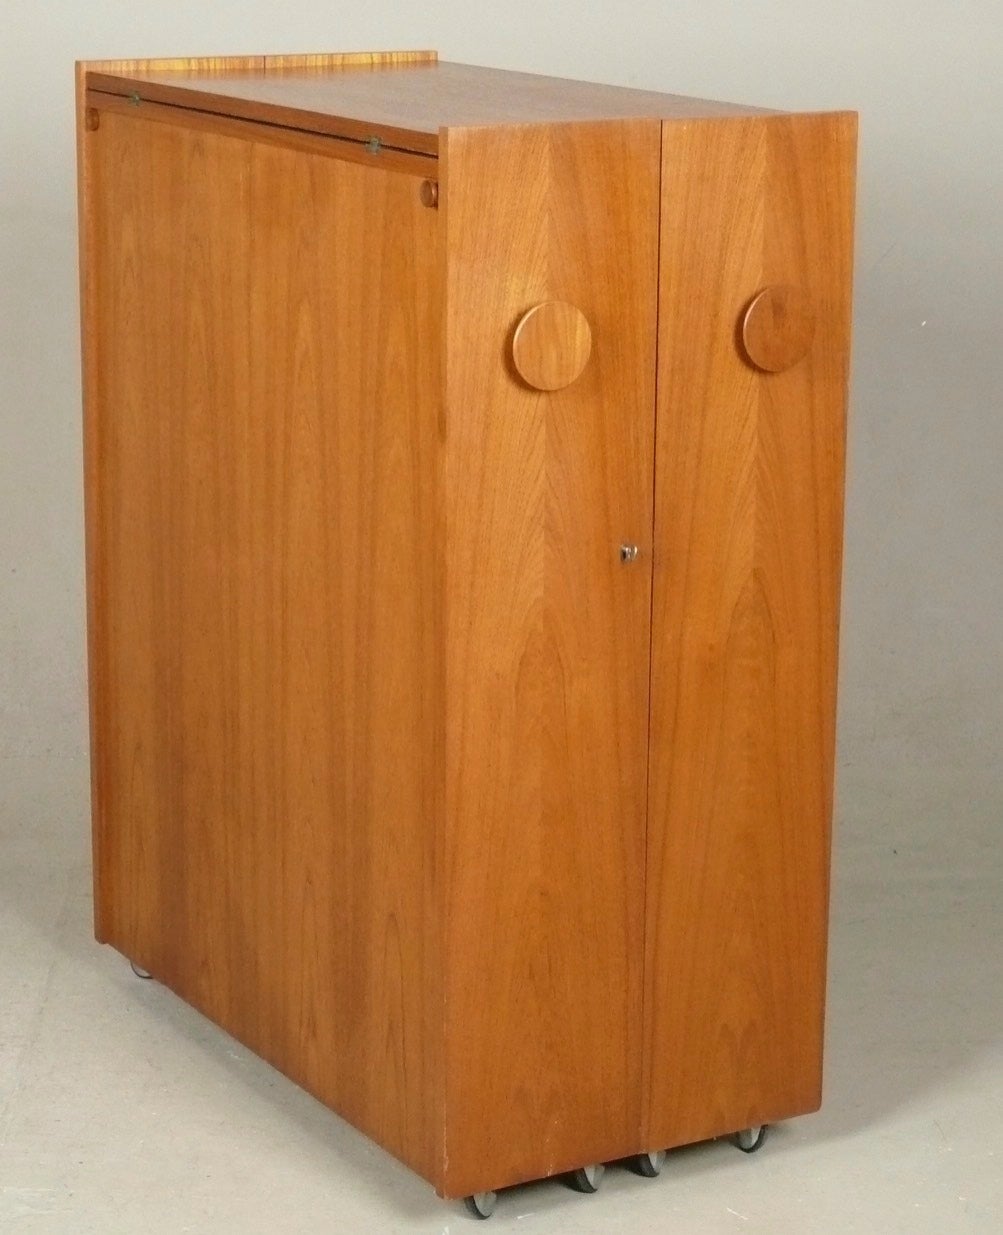 1960s rolling teak cocktail cabinet or serving bar from Denmark designed by Erik Buck. For daily use, it's an unassuming rolling and locking cocktail cabinet with lots of storage for liquor and glassware. When you have a party, you can open it, flip